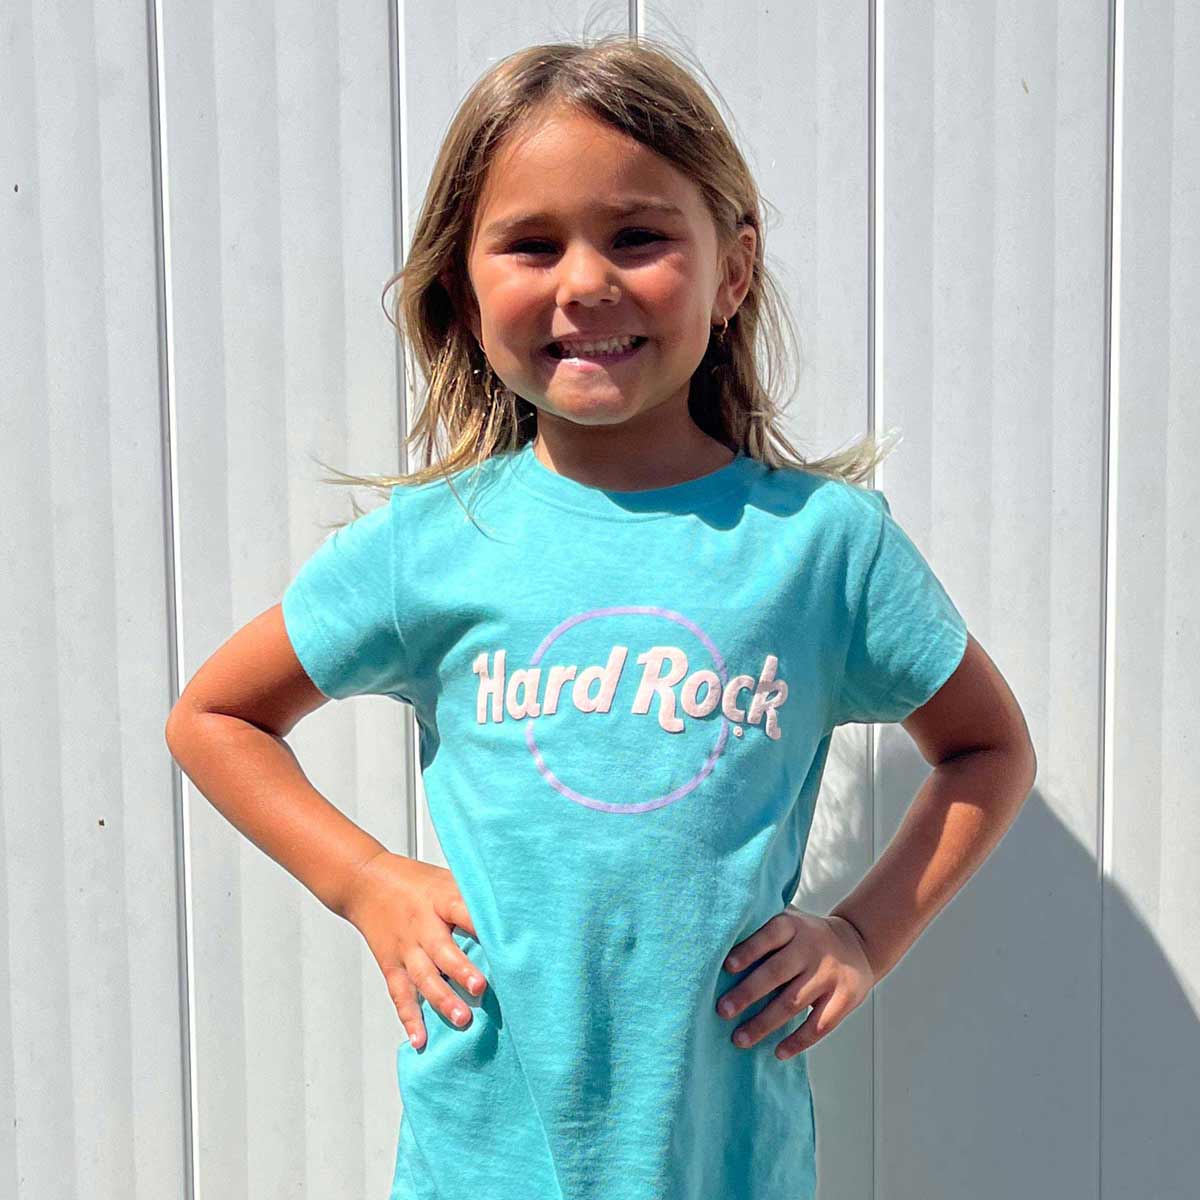 Hard Rock Youth Fit Pop of Color Tee in Light Aqua image number 3